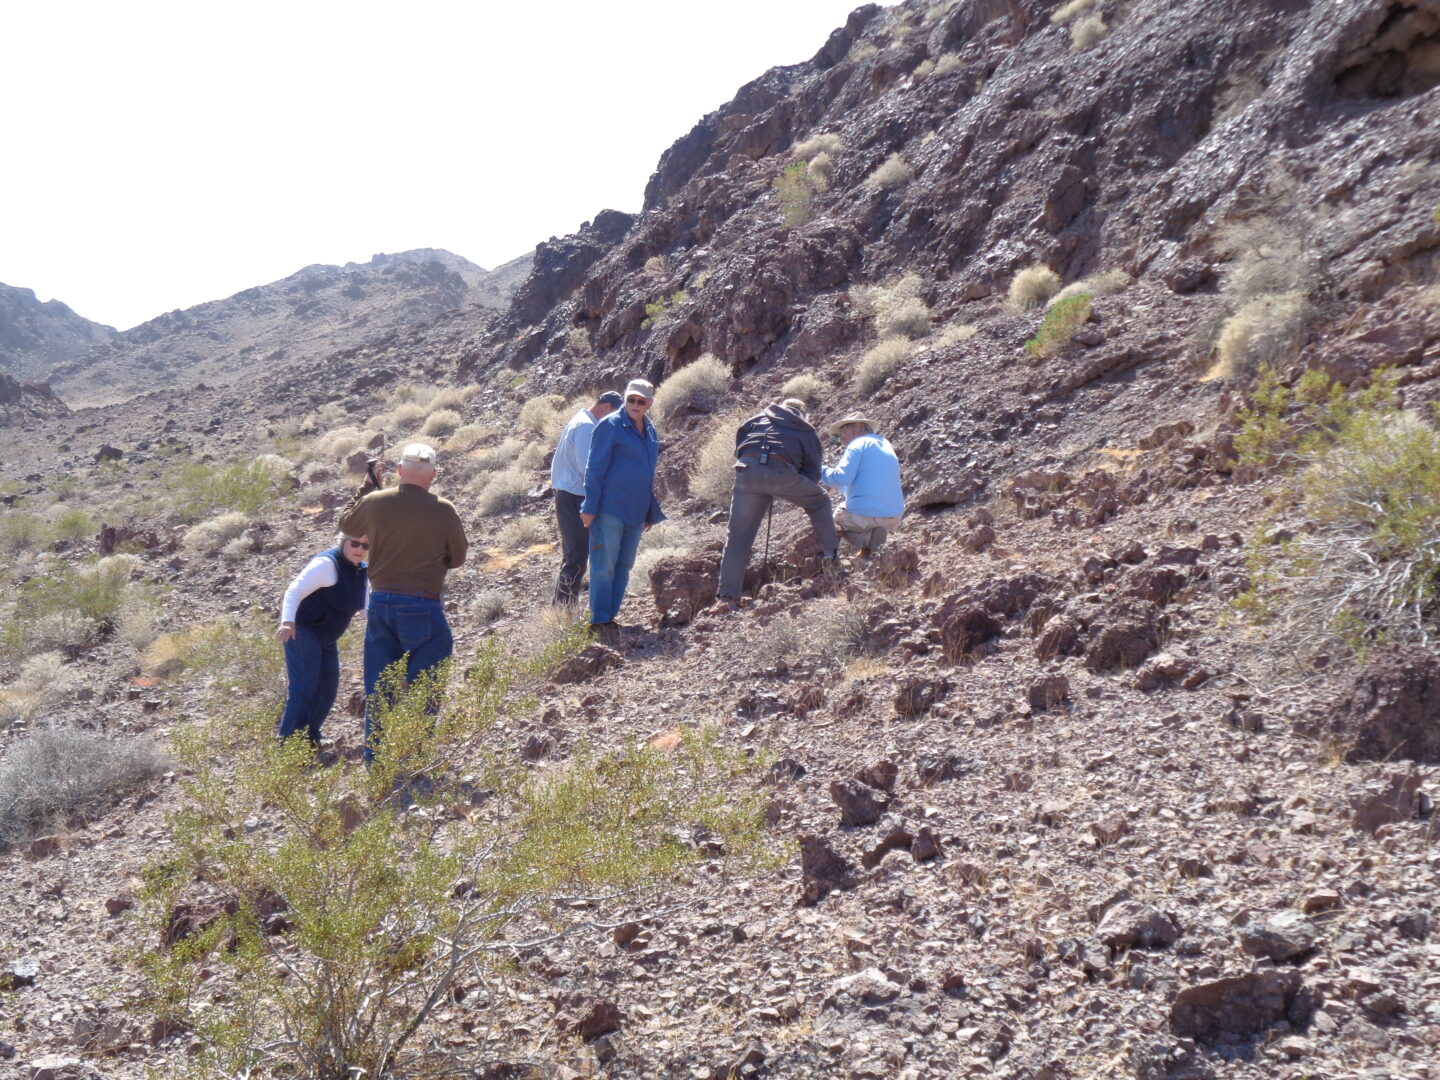 A small group of people look at geological features near Palo Verde, CA